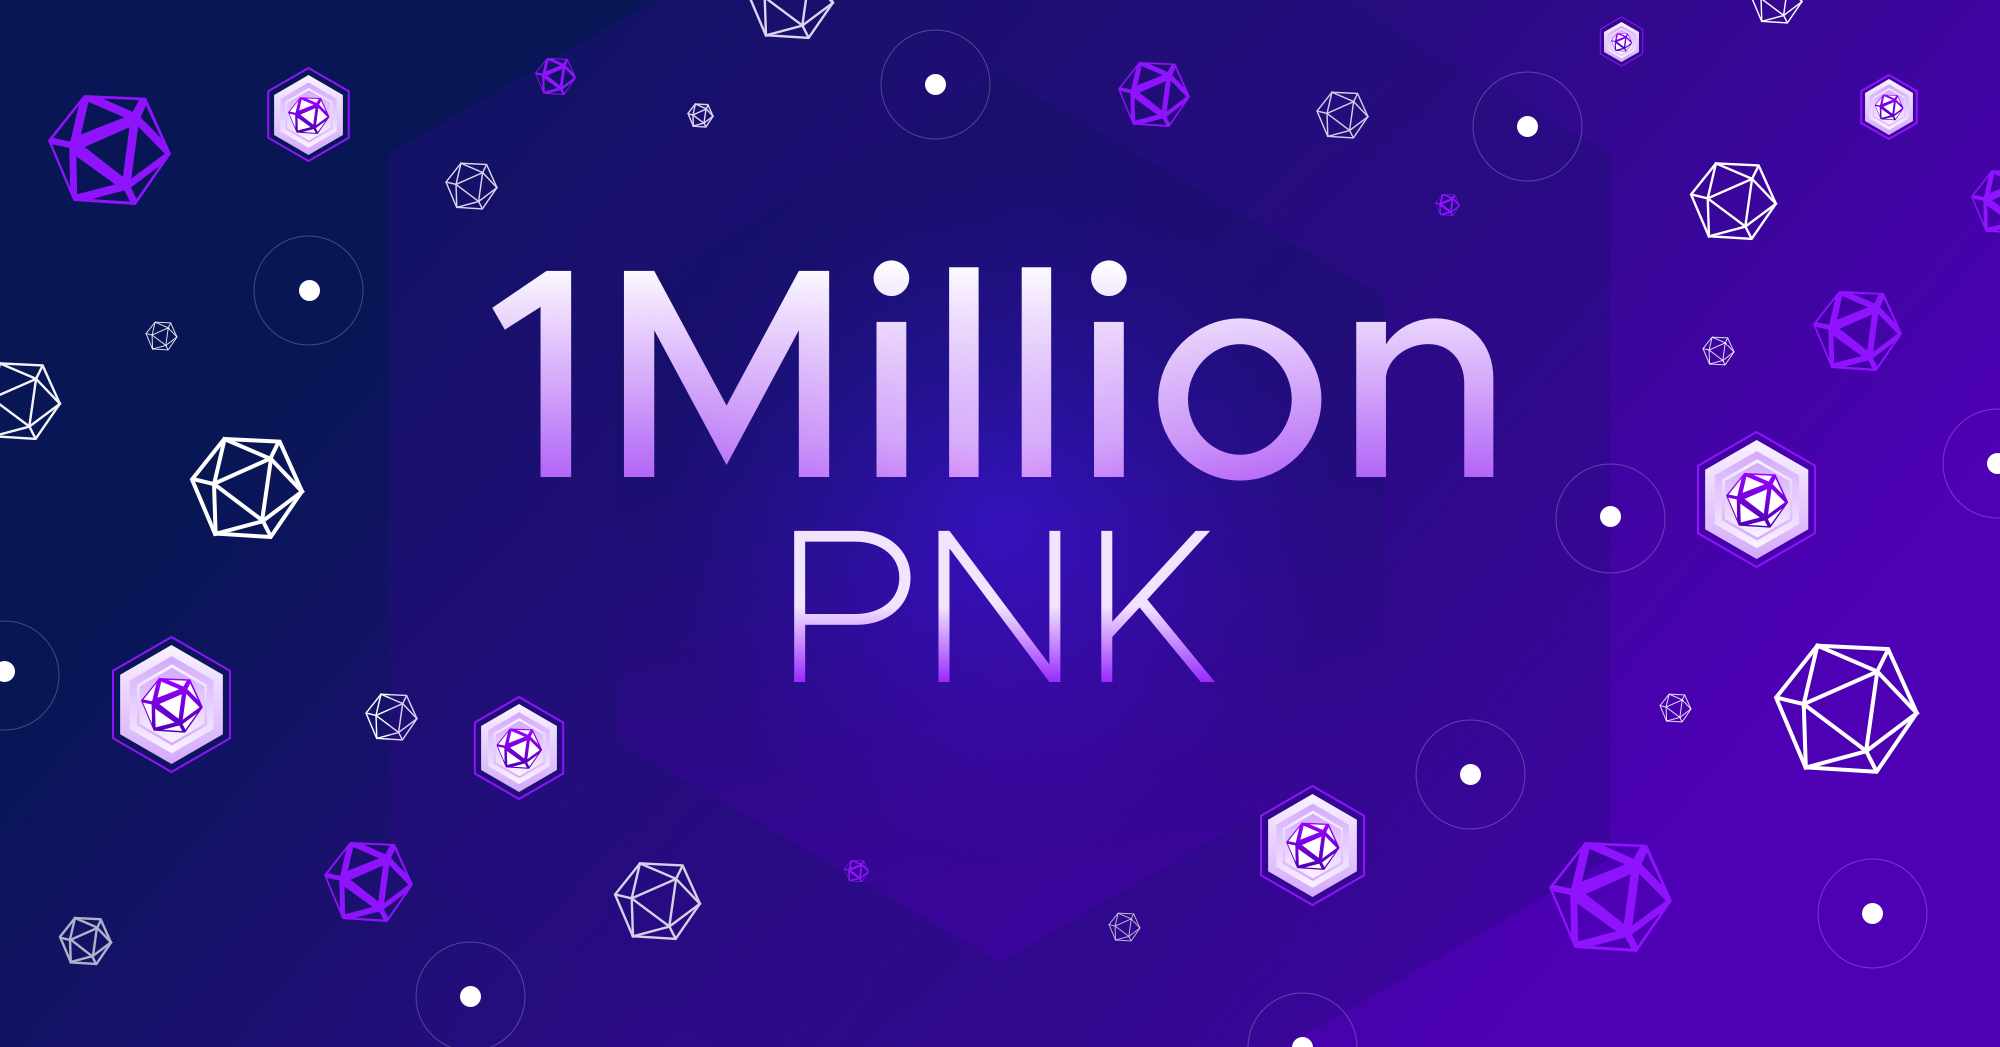 Submit Tokens to the Kleros T2CR For a Share of 1 Million PNK